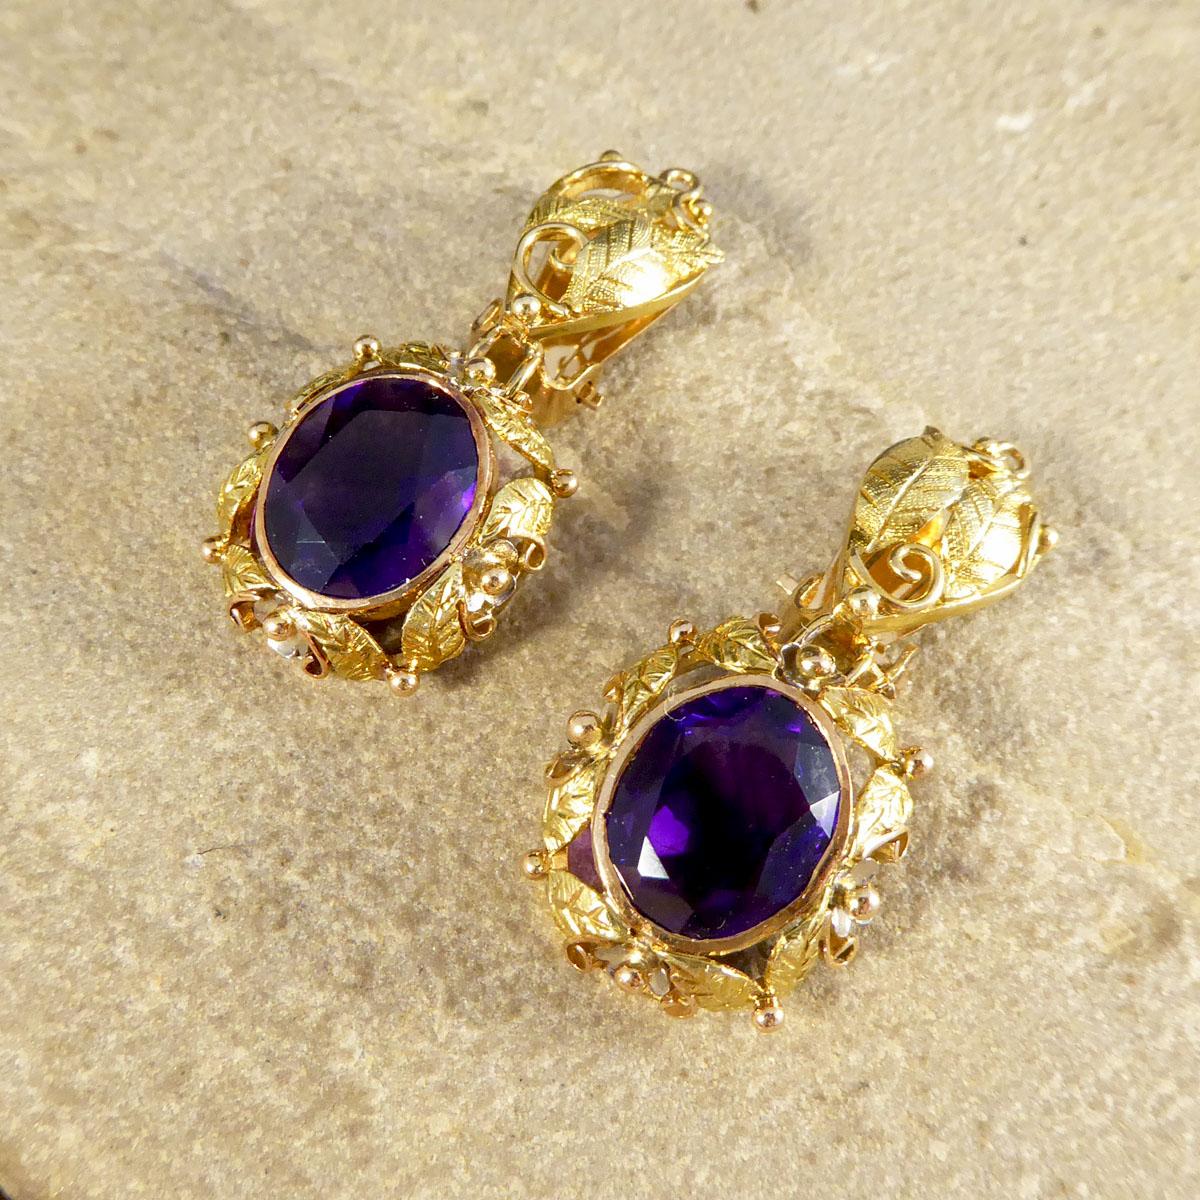 Such a gorgeous pair of vintage clip back earrings that has been crafted in the 1950's in great condition. They feature a beautiful big and vibrant Amethyst gemstone in the centre of each earring. The drop itself has a filigree pattern surround to